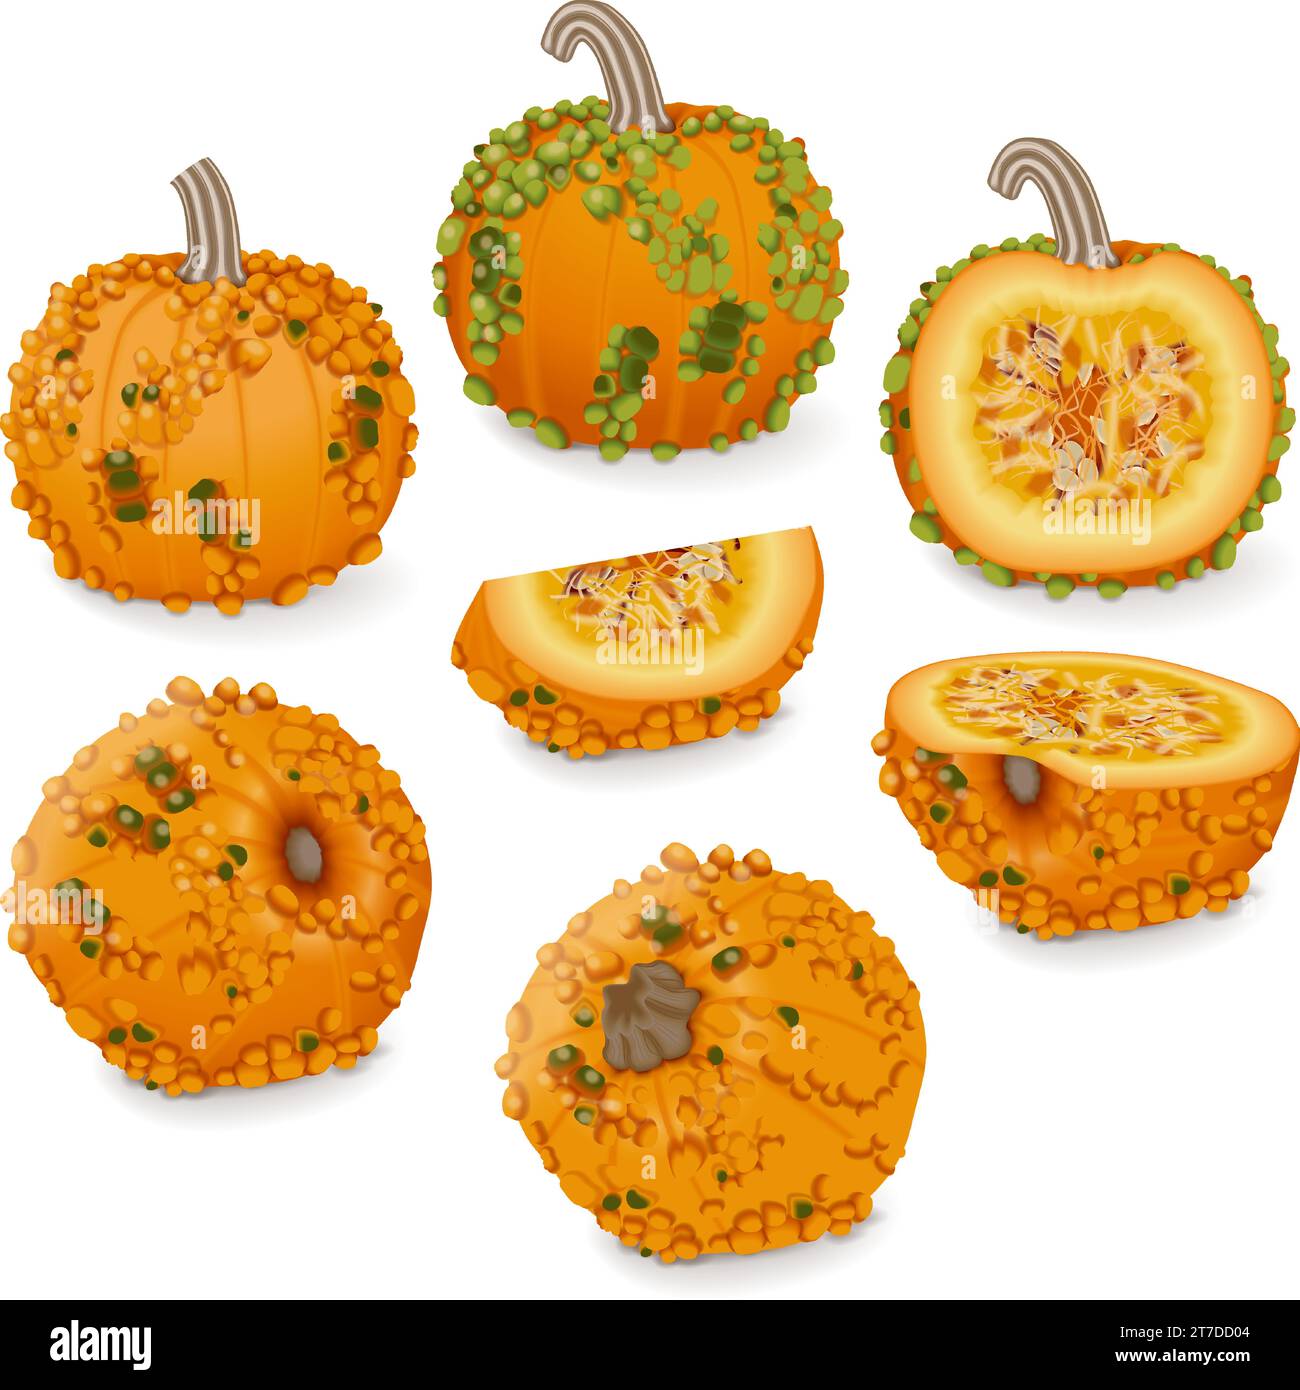 Set of Knucklehead Pumpkins. Winter squash. Cucurbita pepo. Fruits and vegetables. Isolated vector illustration. Stock Vector